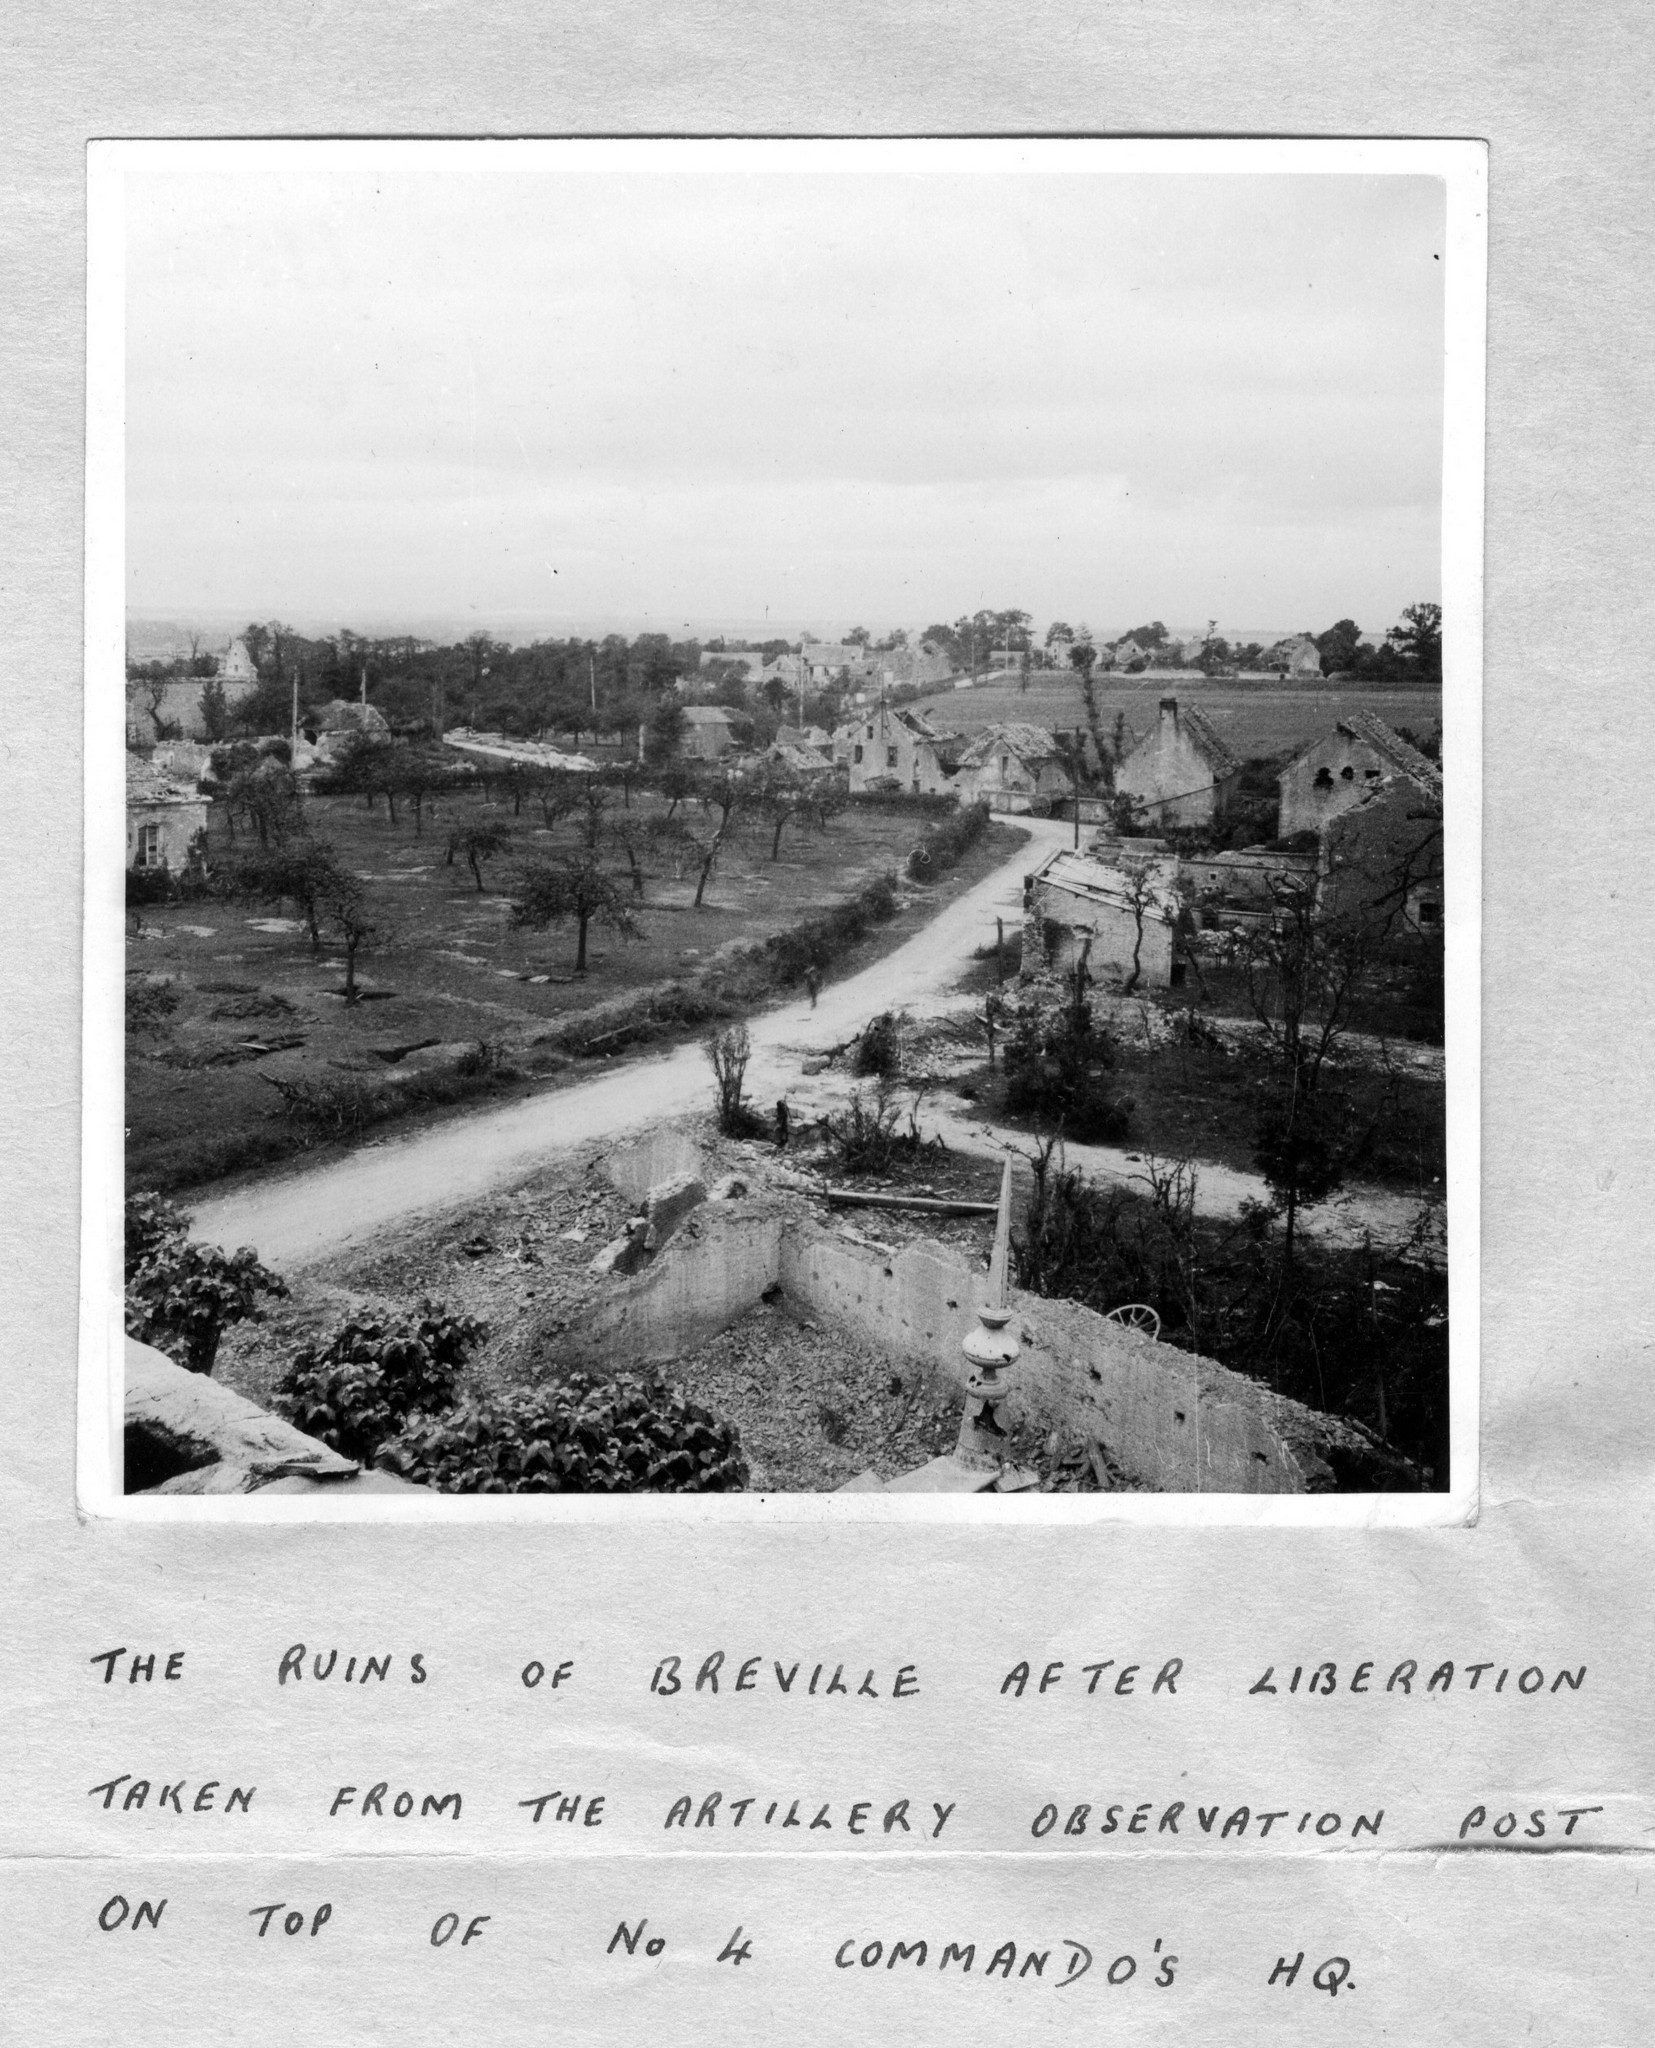 The ruins of Breville after liberation